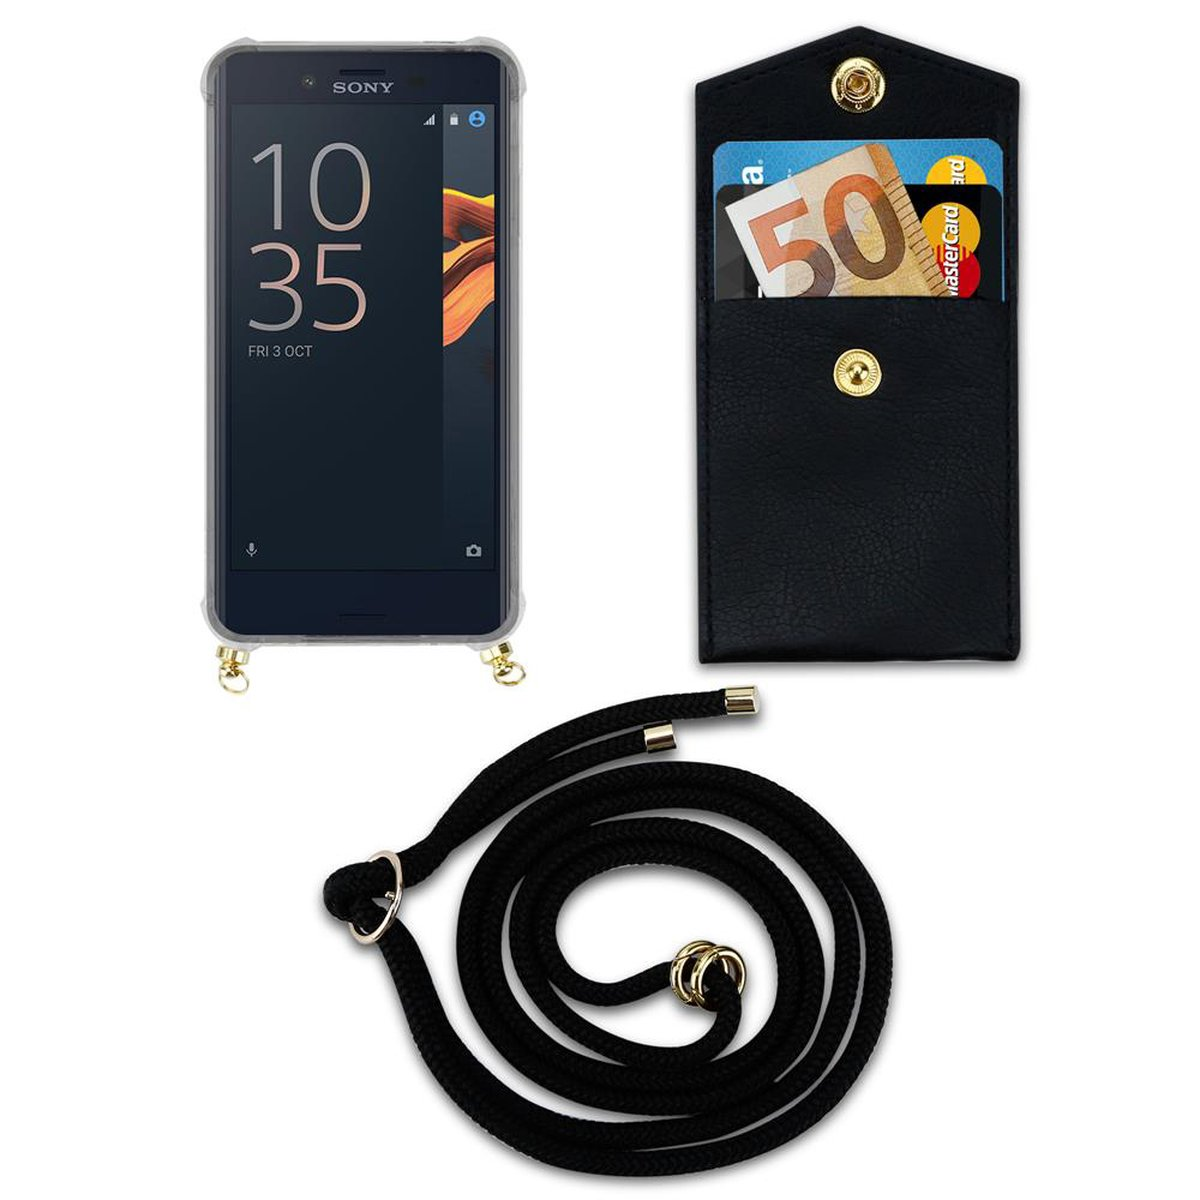 CADORABO Handy Kordel SCHWARZ Ringen, mit Sony, COMPACT, Xperia abnehmbarer Kette X Gold und Band Backcover, Hülle